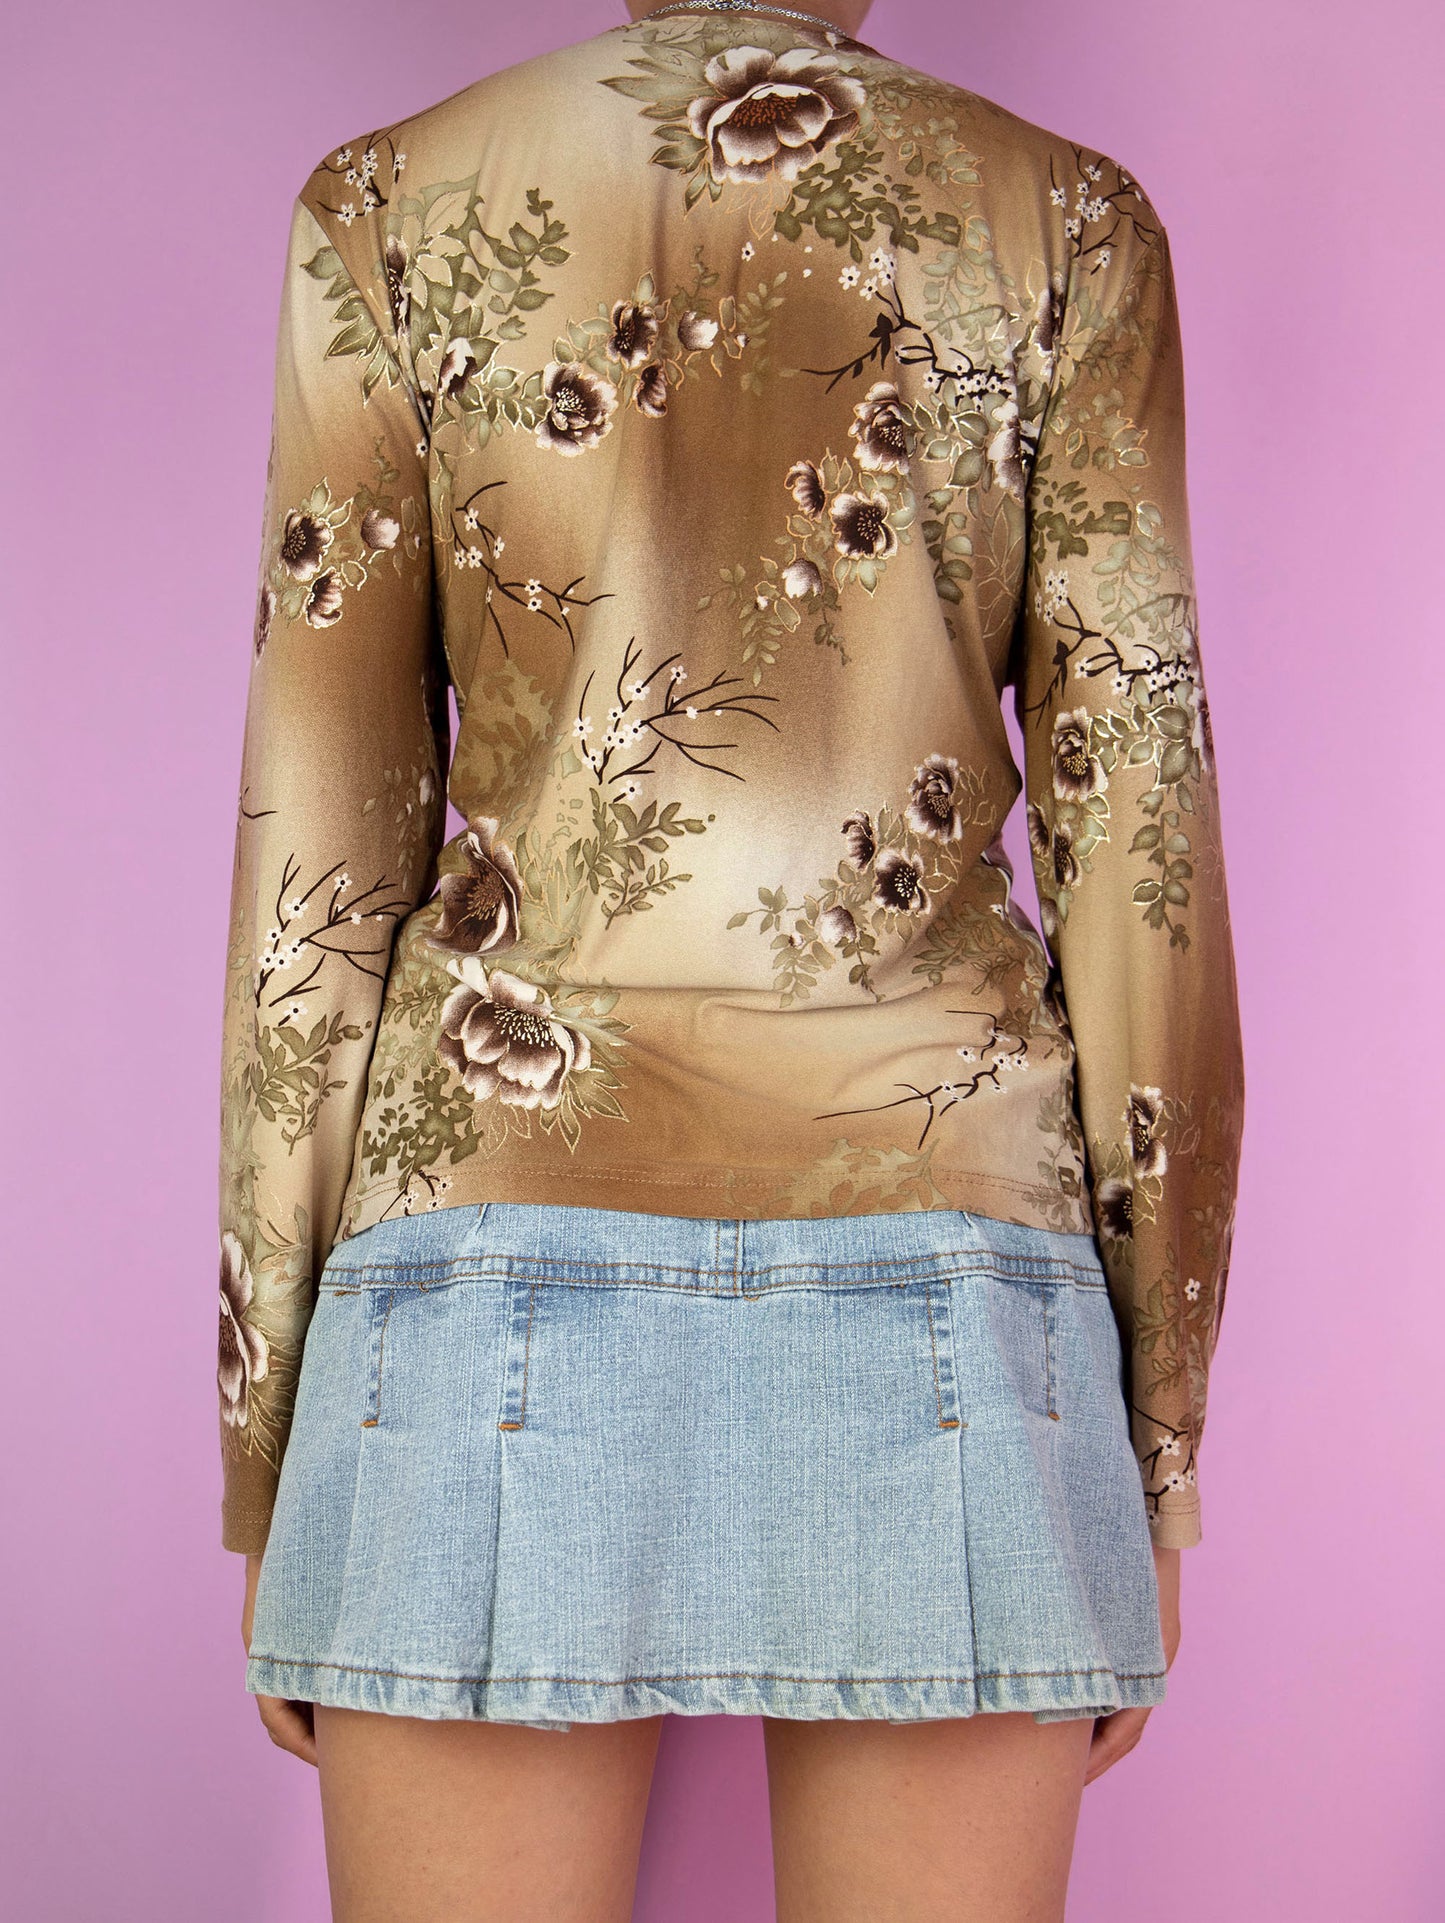 The Y2K Brown Floral Wrap Top is a vintage shirt wrapped and tied on one side. Boho fairy 2000s blouse.